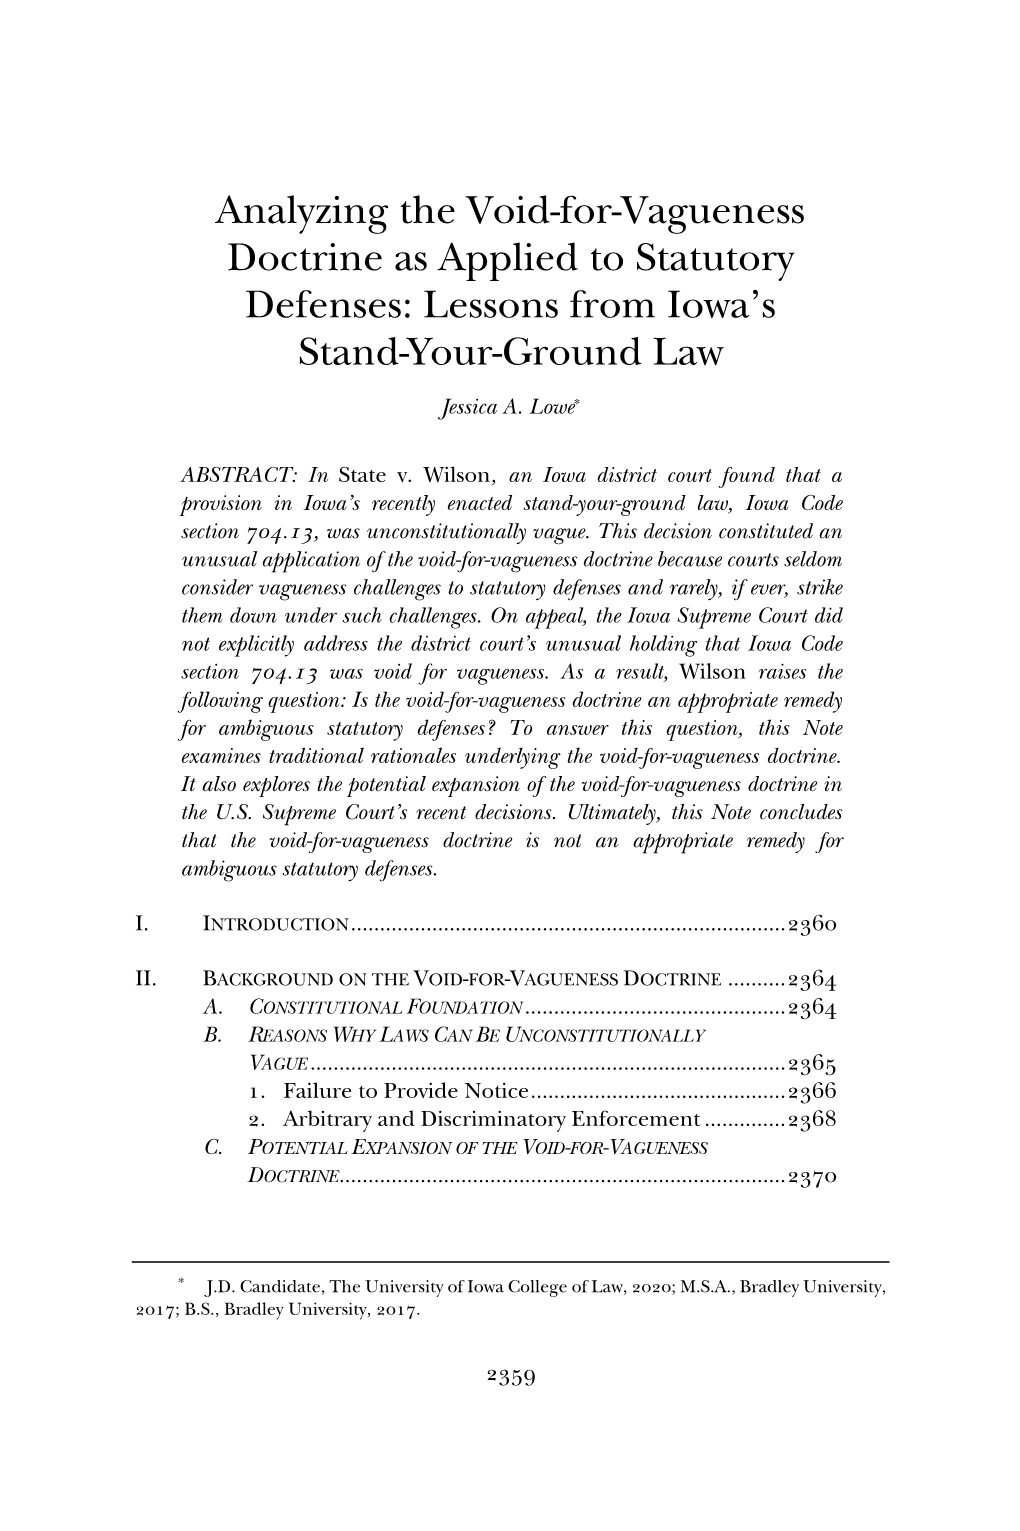 Analyzing the Void-For-Vagueness Doctrine As Applied to Statutory Defenses: Lessons from Iowa’S Stand-Your-Ground Law